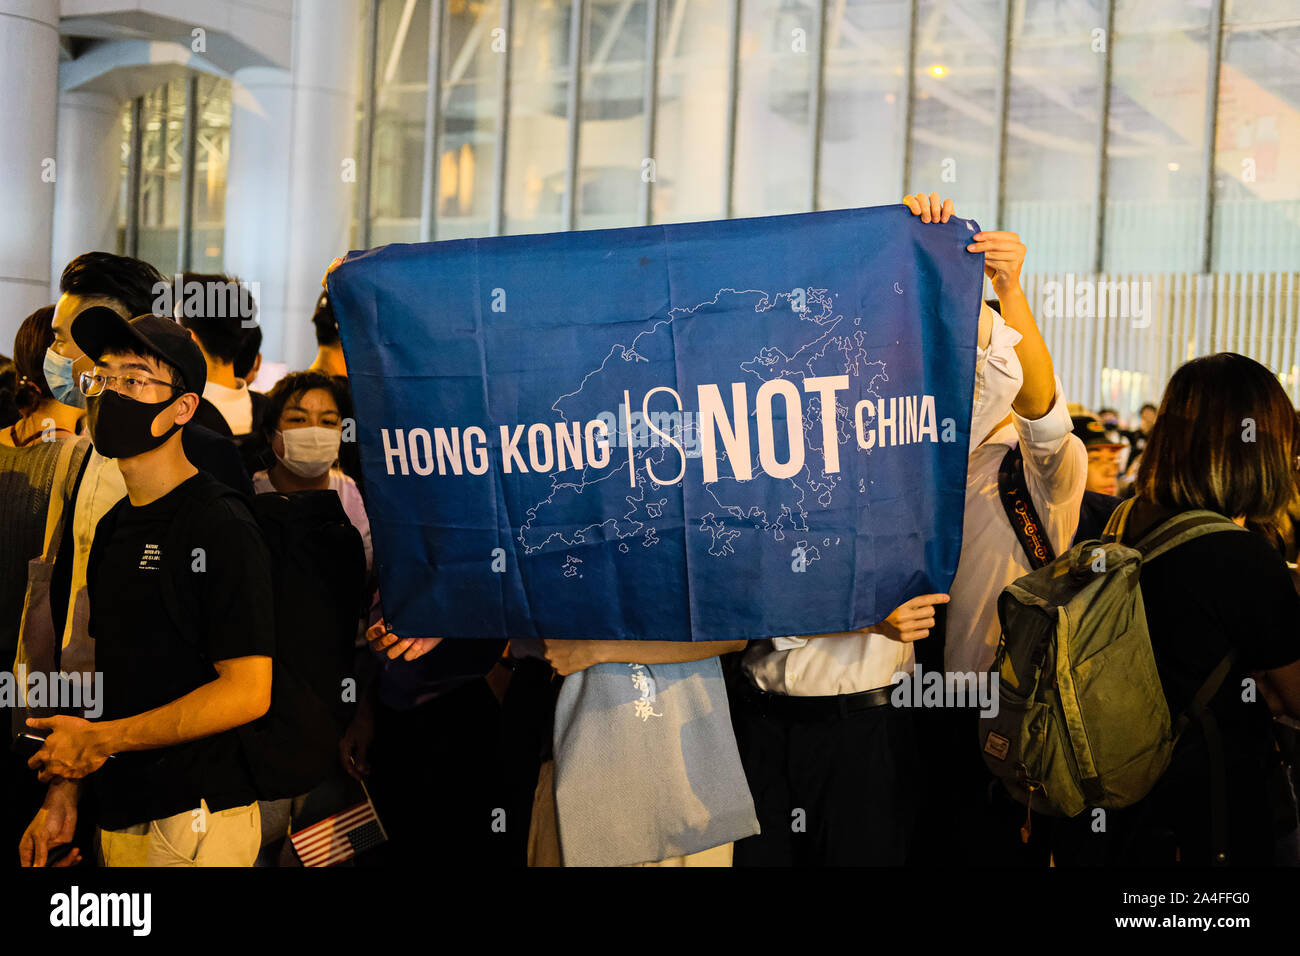 Hong Kong. 14th Oct, 2019. Protestors with Hong Kong is not China sign during Hong Kong Human Rights and Democracy Act Rally at Chater Garden in Central District Hong Kong. This rally was proposed to US lawmakers that they should pass the act that would help the Hong Kong democracy. ItÃs aimed at putting pressure on Beijing to uphold its promise to preserve Hong KongÃs autonomy. Credit: Keith Tsuji/ZUMA Wire/Alamy Live News Stock Photo